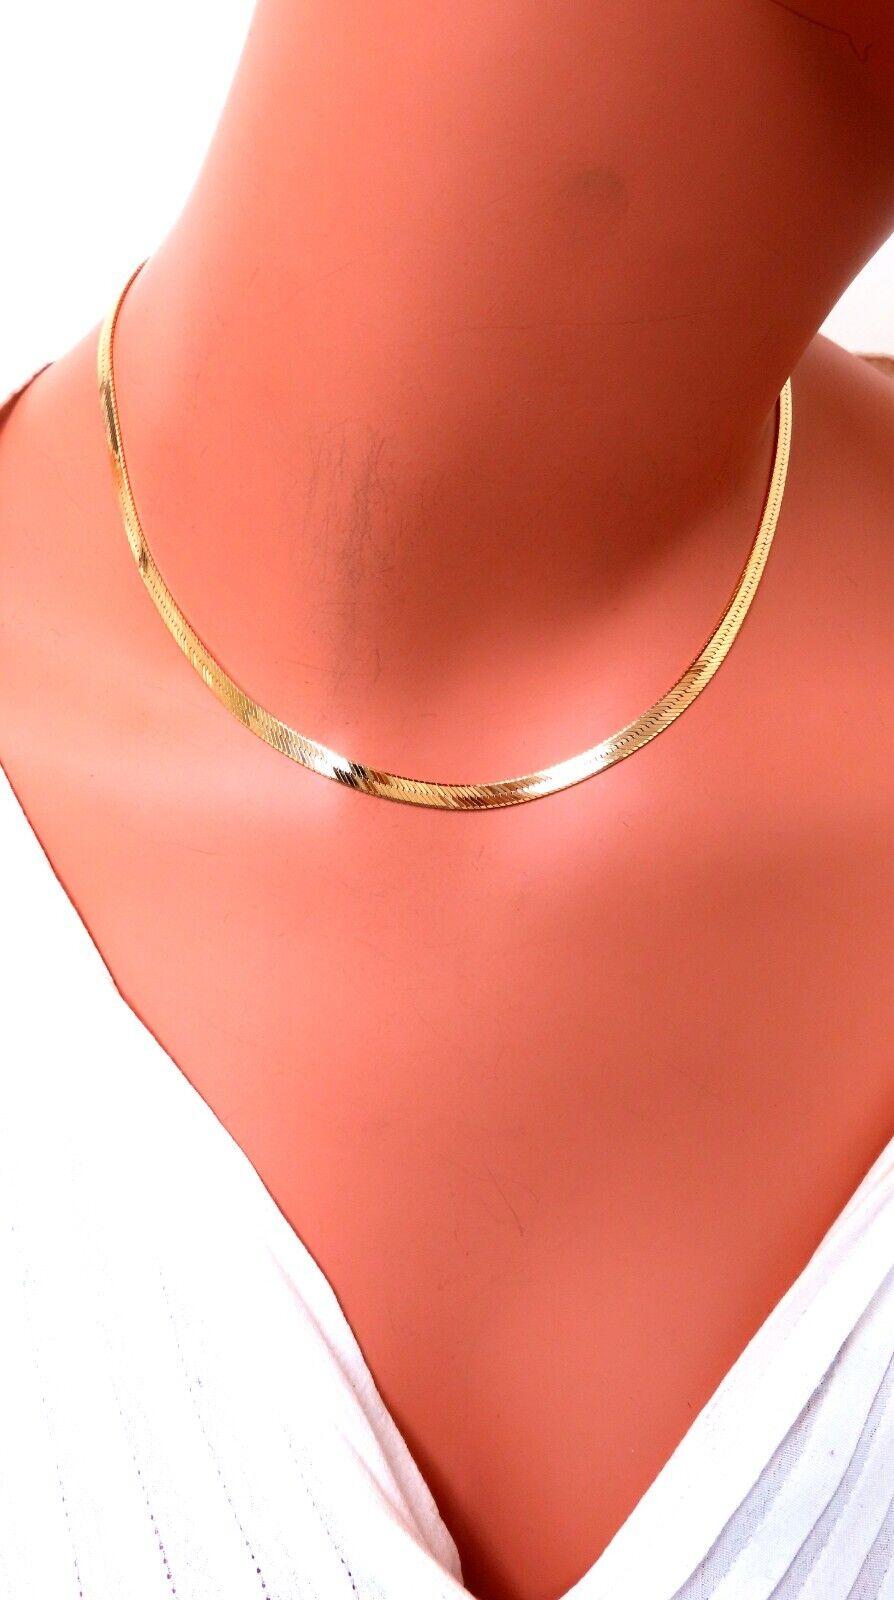 Herringbone Flat 4mm

14kt. Yellow gold

11.8 grams 

16 inches = wearable length